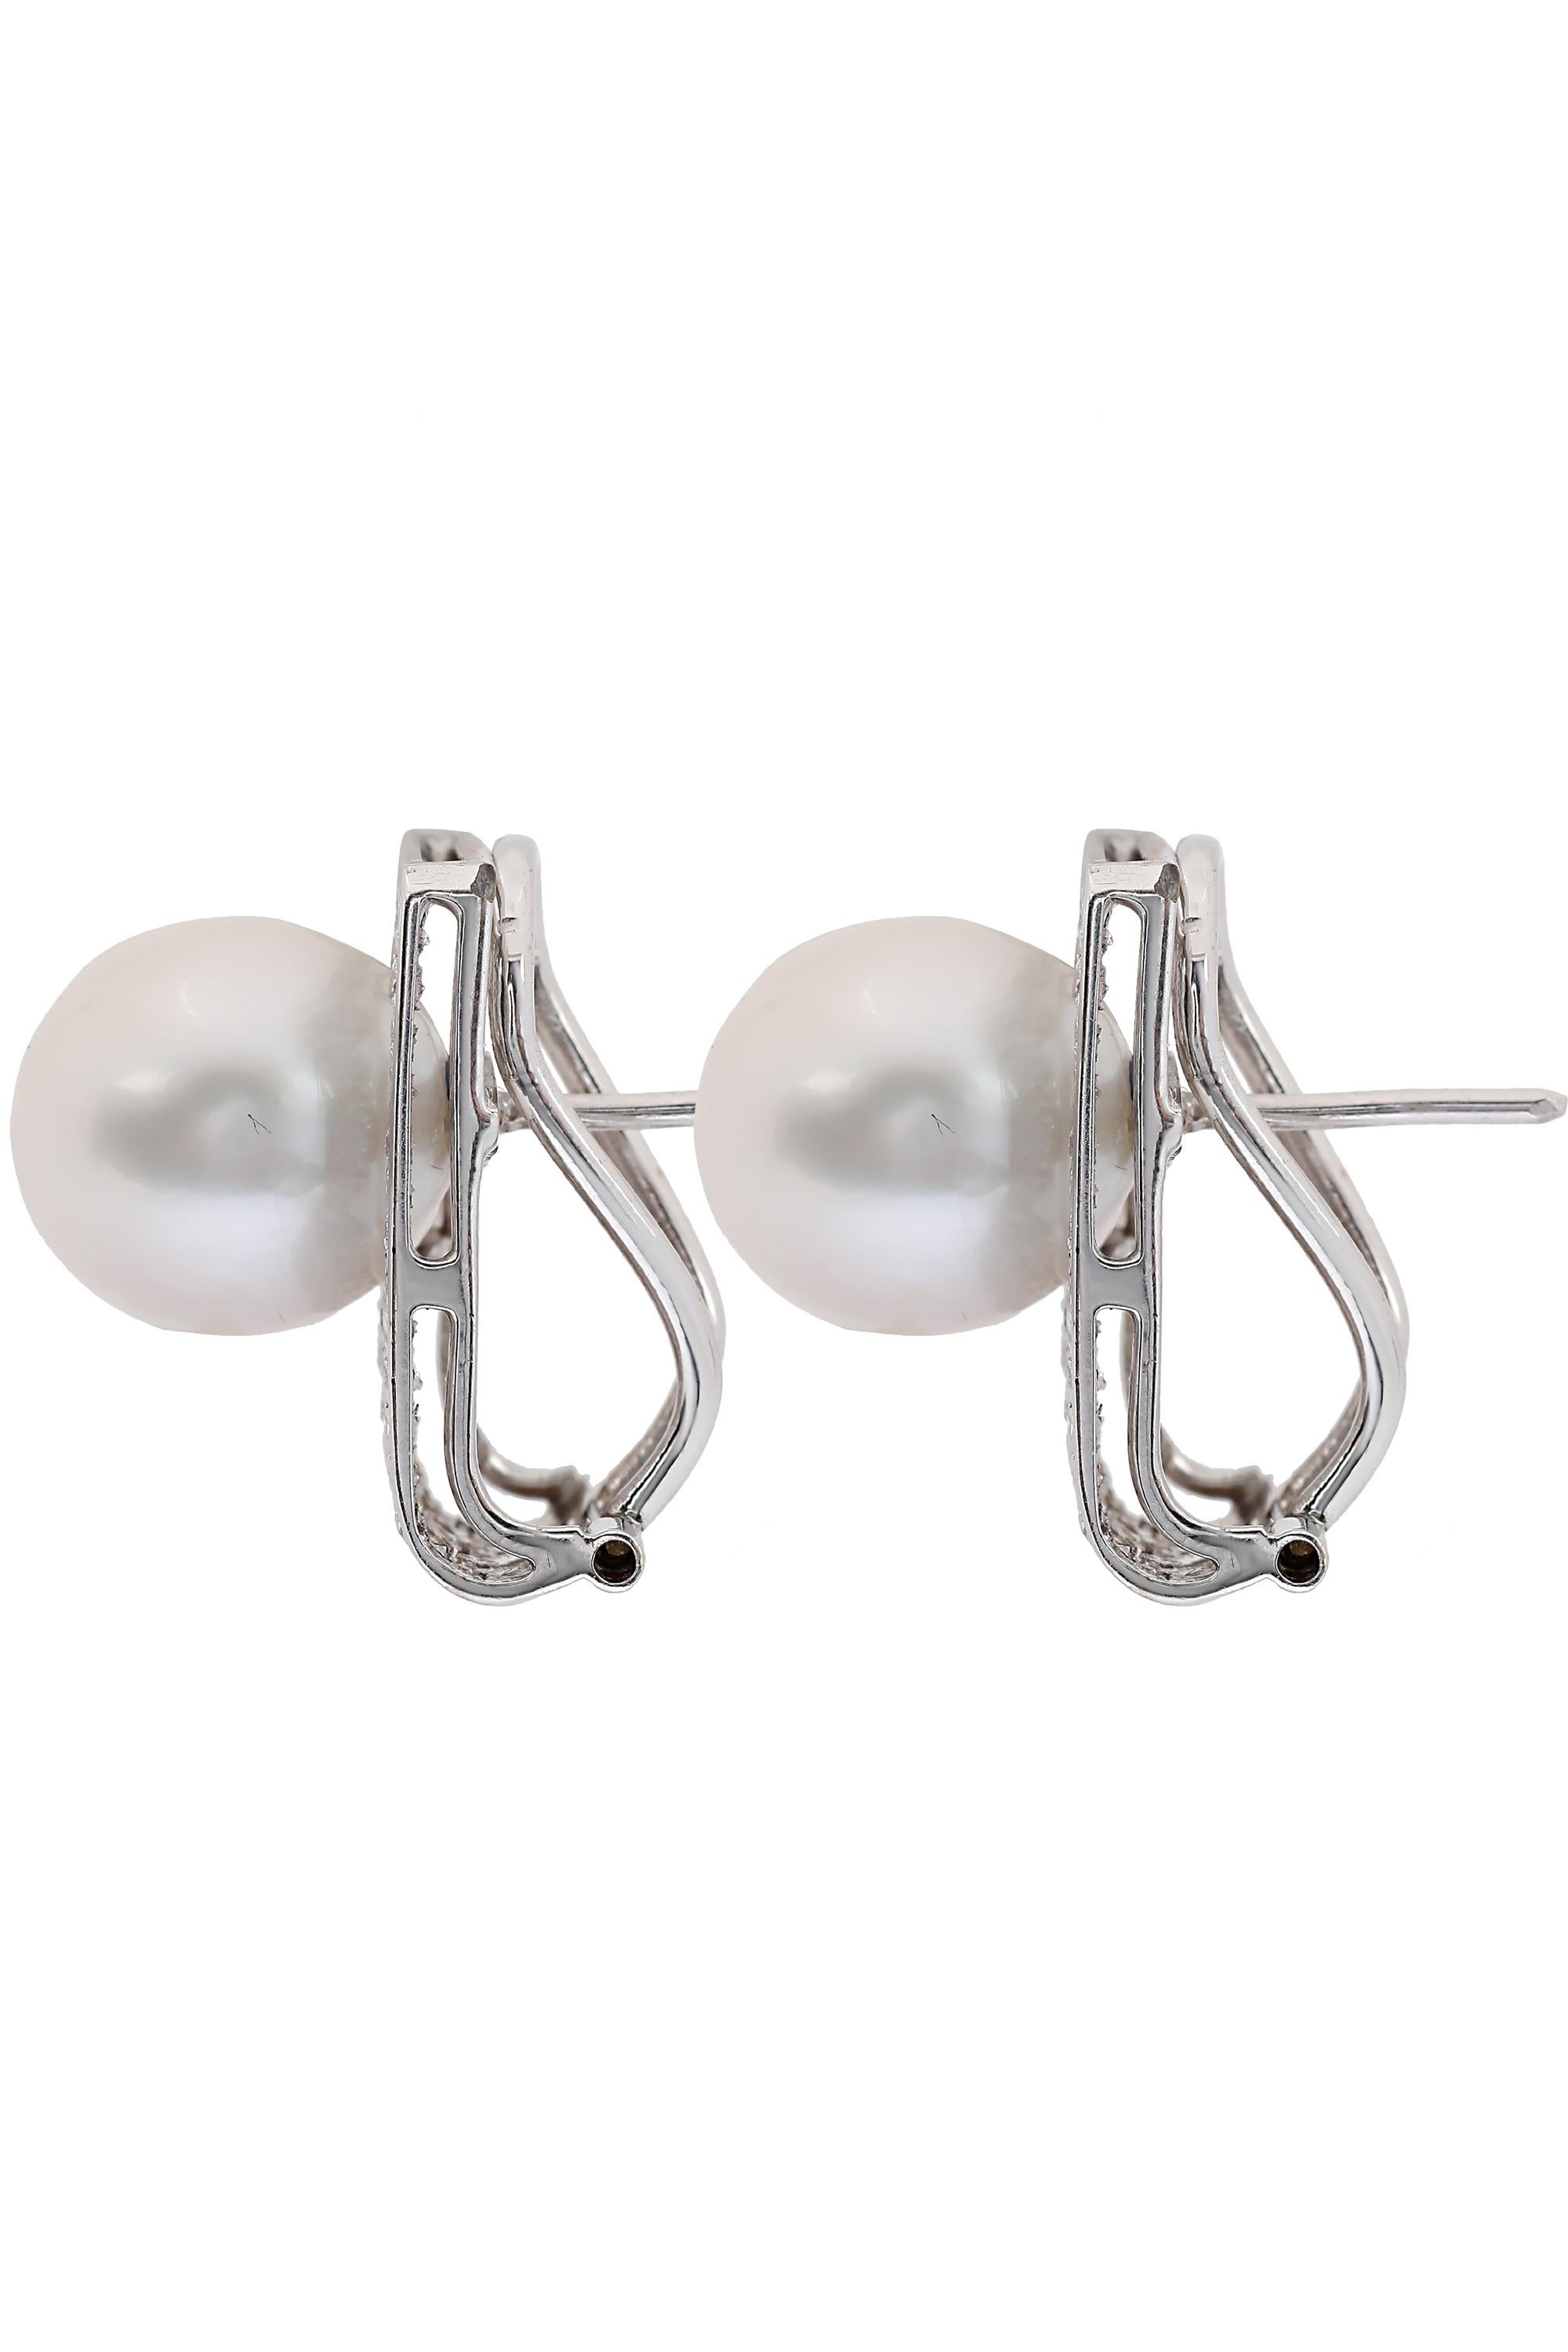 South Sea Pearl and Diamond Ring, Earrings and Pendant Set For Sale 1